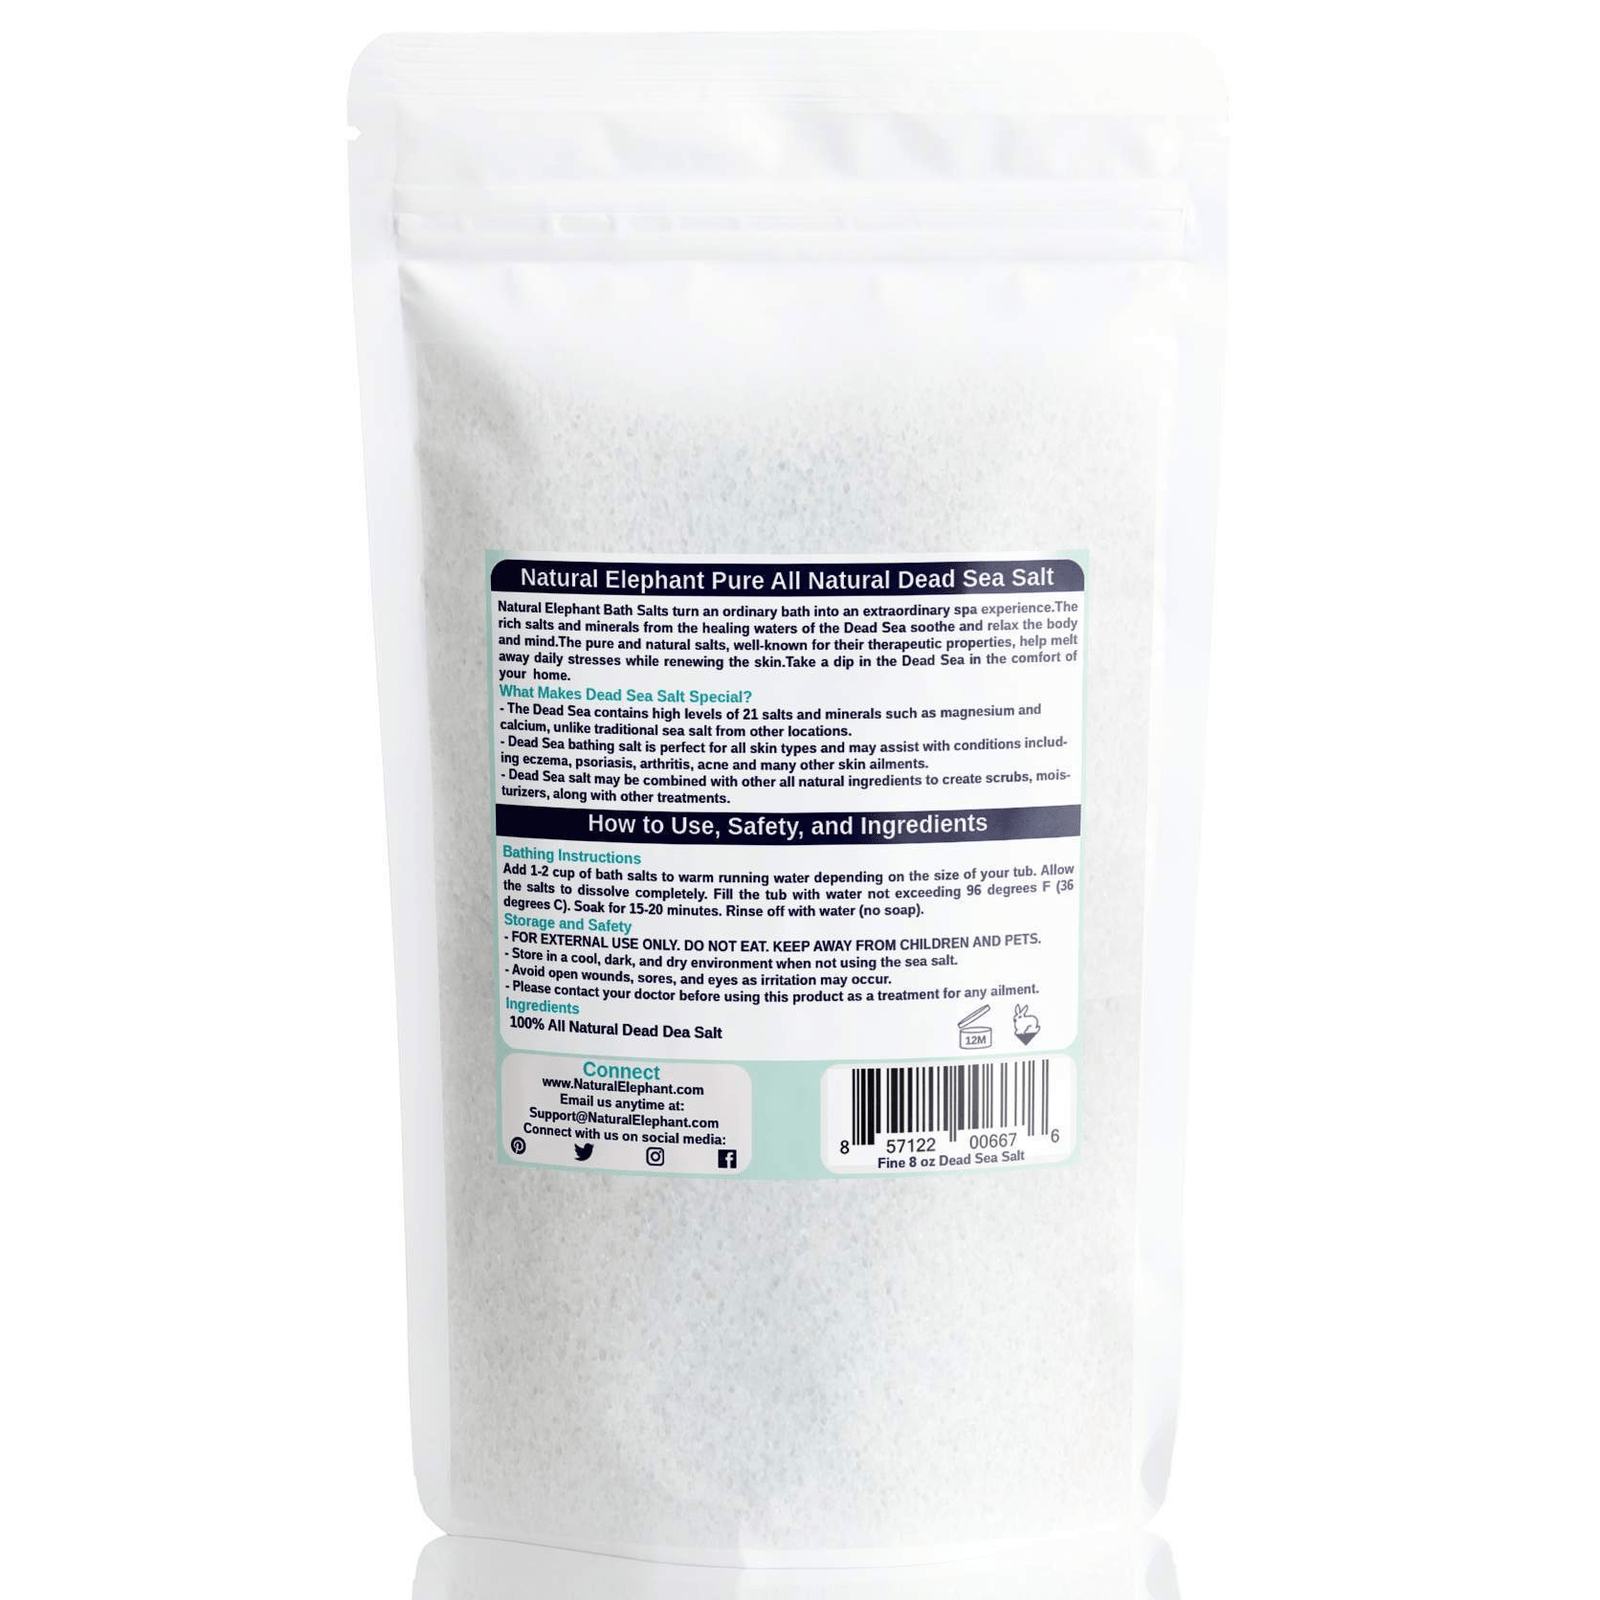 Natural Elephant Fine Dead Sea Salt | Small 8 oz-Natural Elephant-BB_Bath and Shower,BB_Bubbles and Salts,Brand_Natural Elephant,Collection_Bath and Body,Collection_Skincare,Concern_Acne & Blemishes,Concern_Anti-Aging,Concern_Dry Skin,Concern_Dryness,Concern_Dullness,Concern_Large Pores,Concern_Redness,Concern_Sensitive Skin,NATURAL_Dead Sea Collection